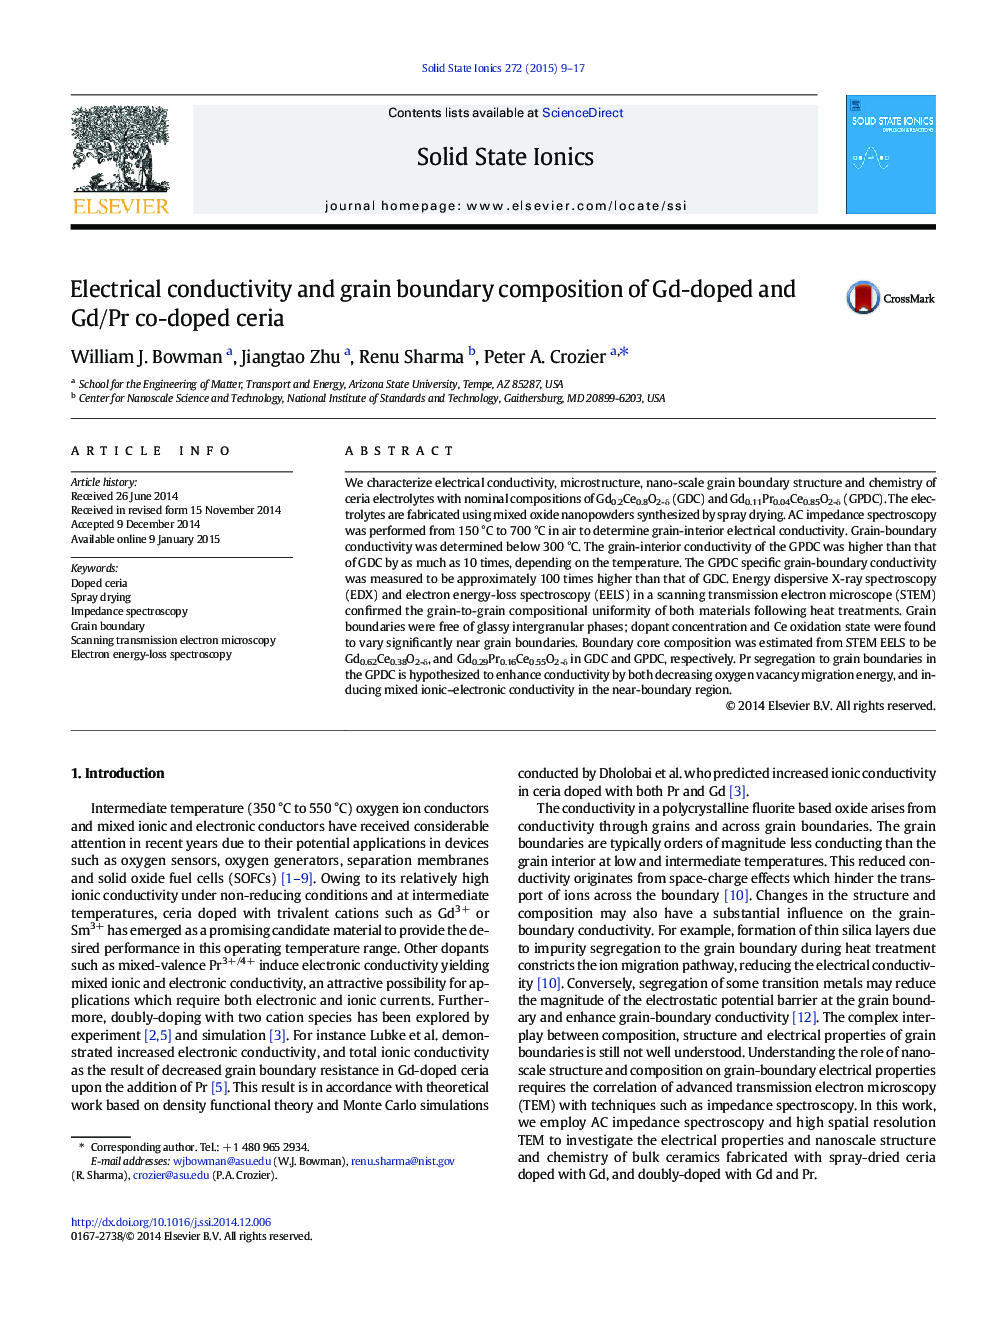 Electrical conductivity and grain boundary composition of Gd-doped and Gd/Pr co-doped ceria